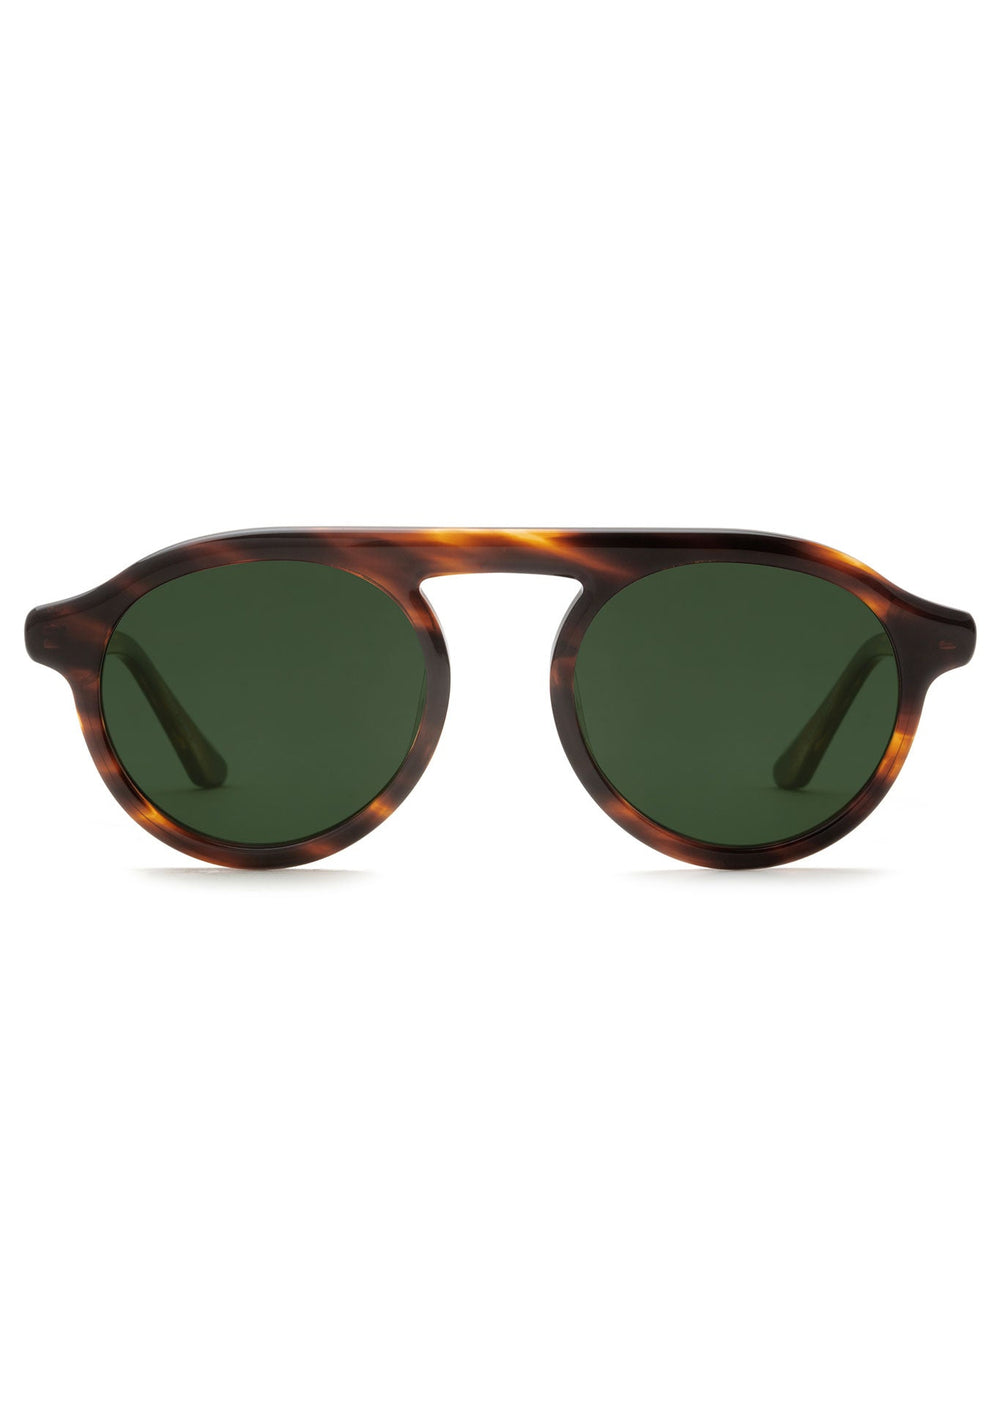 KREWE SUNGLASSES -  CAMERON | Hickory Polarized handcrafted, luxury brown acetate round sunglasses